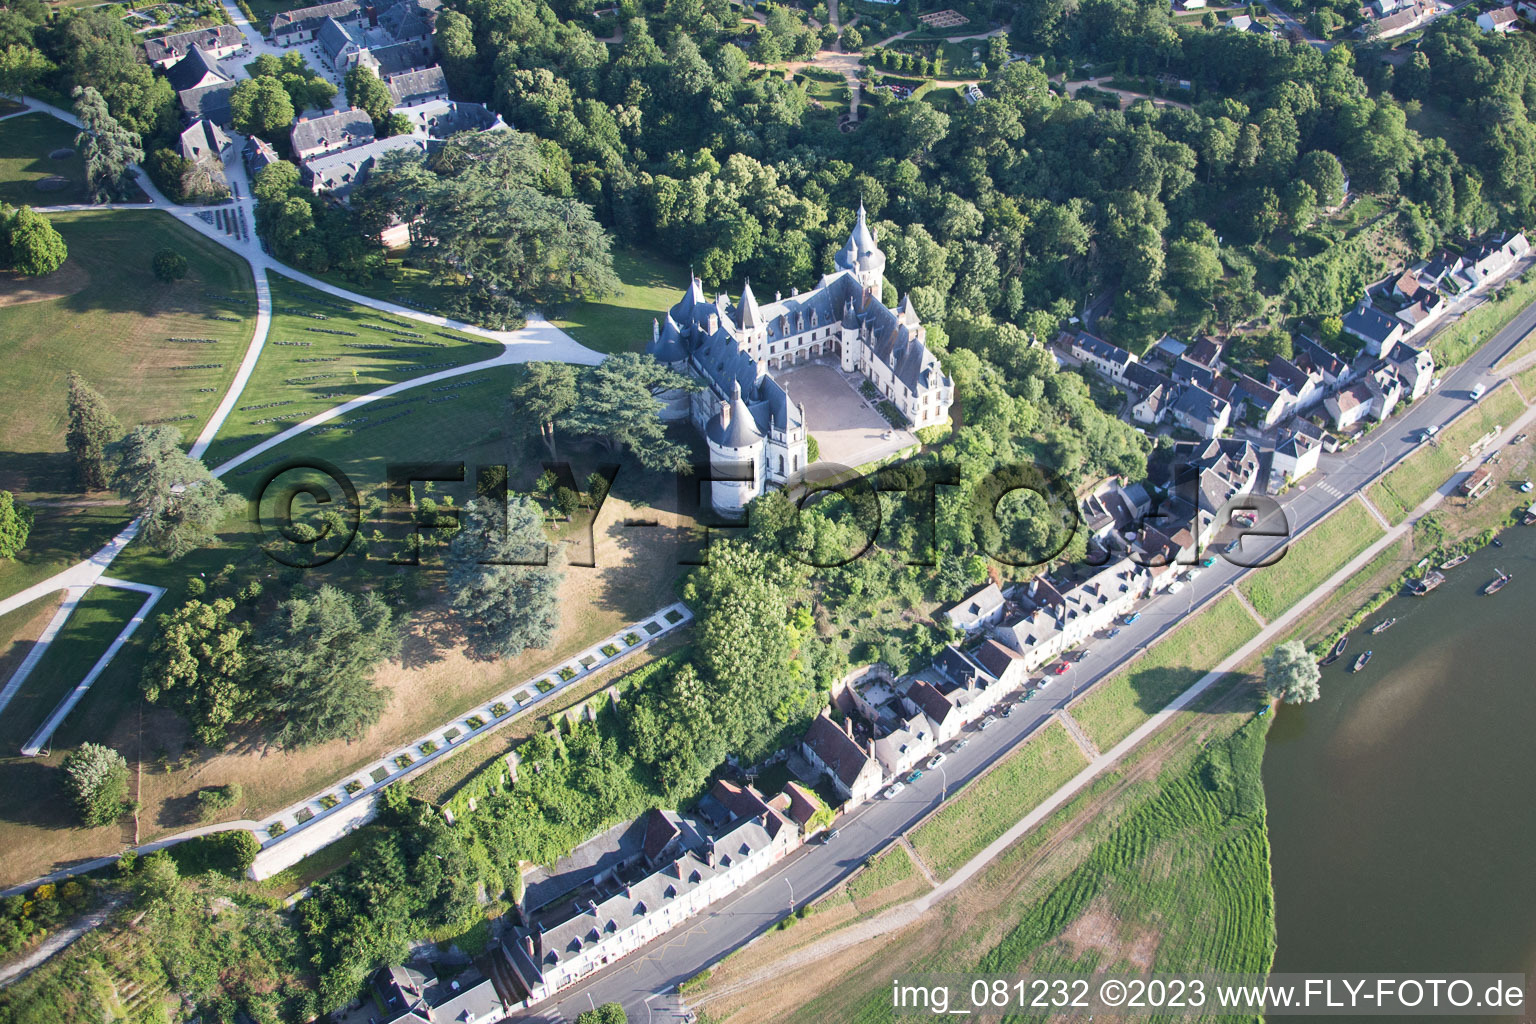 Chaumont-sur-Loire in the state Loir et Cher, France out of the air